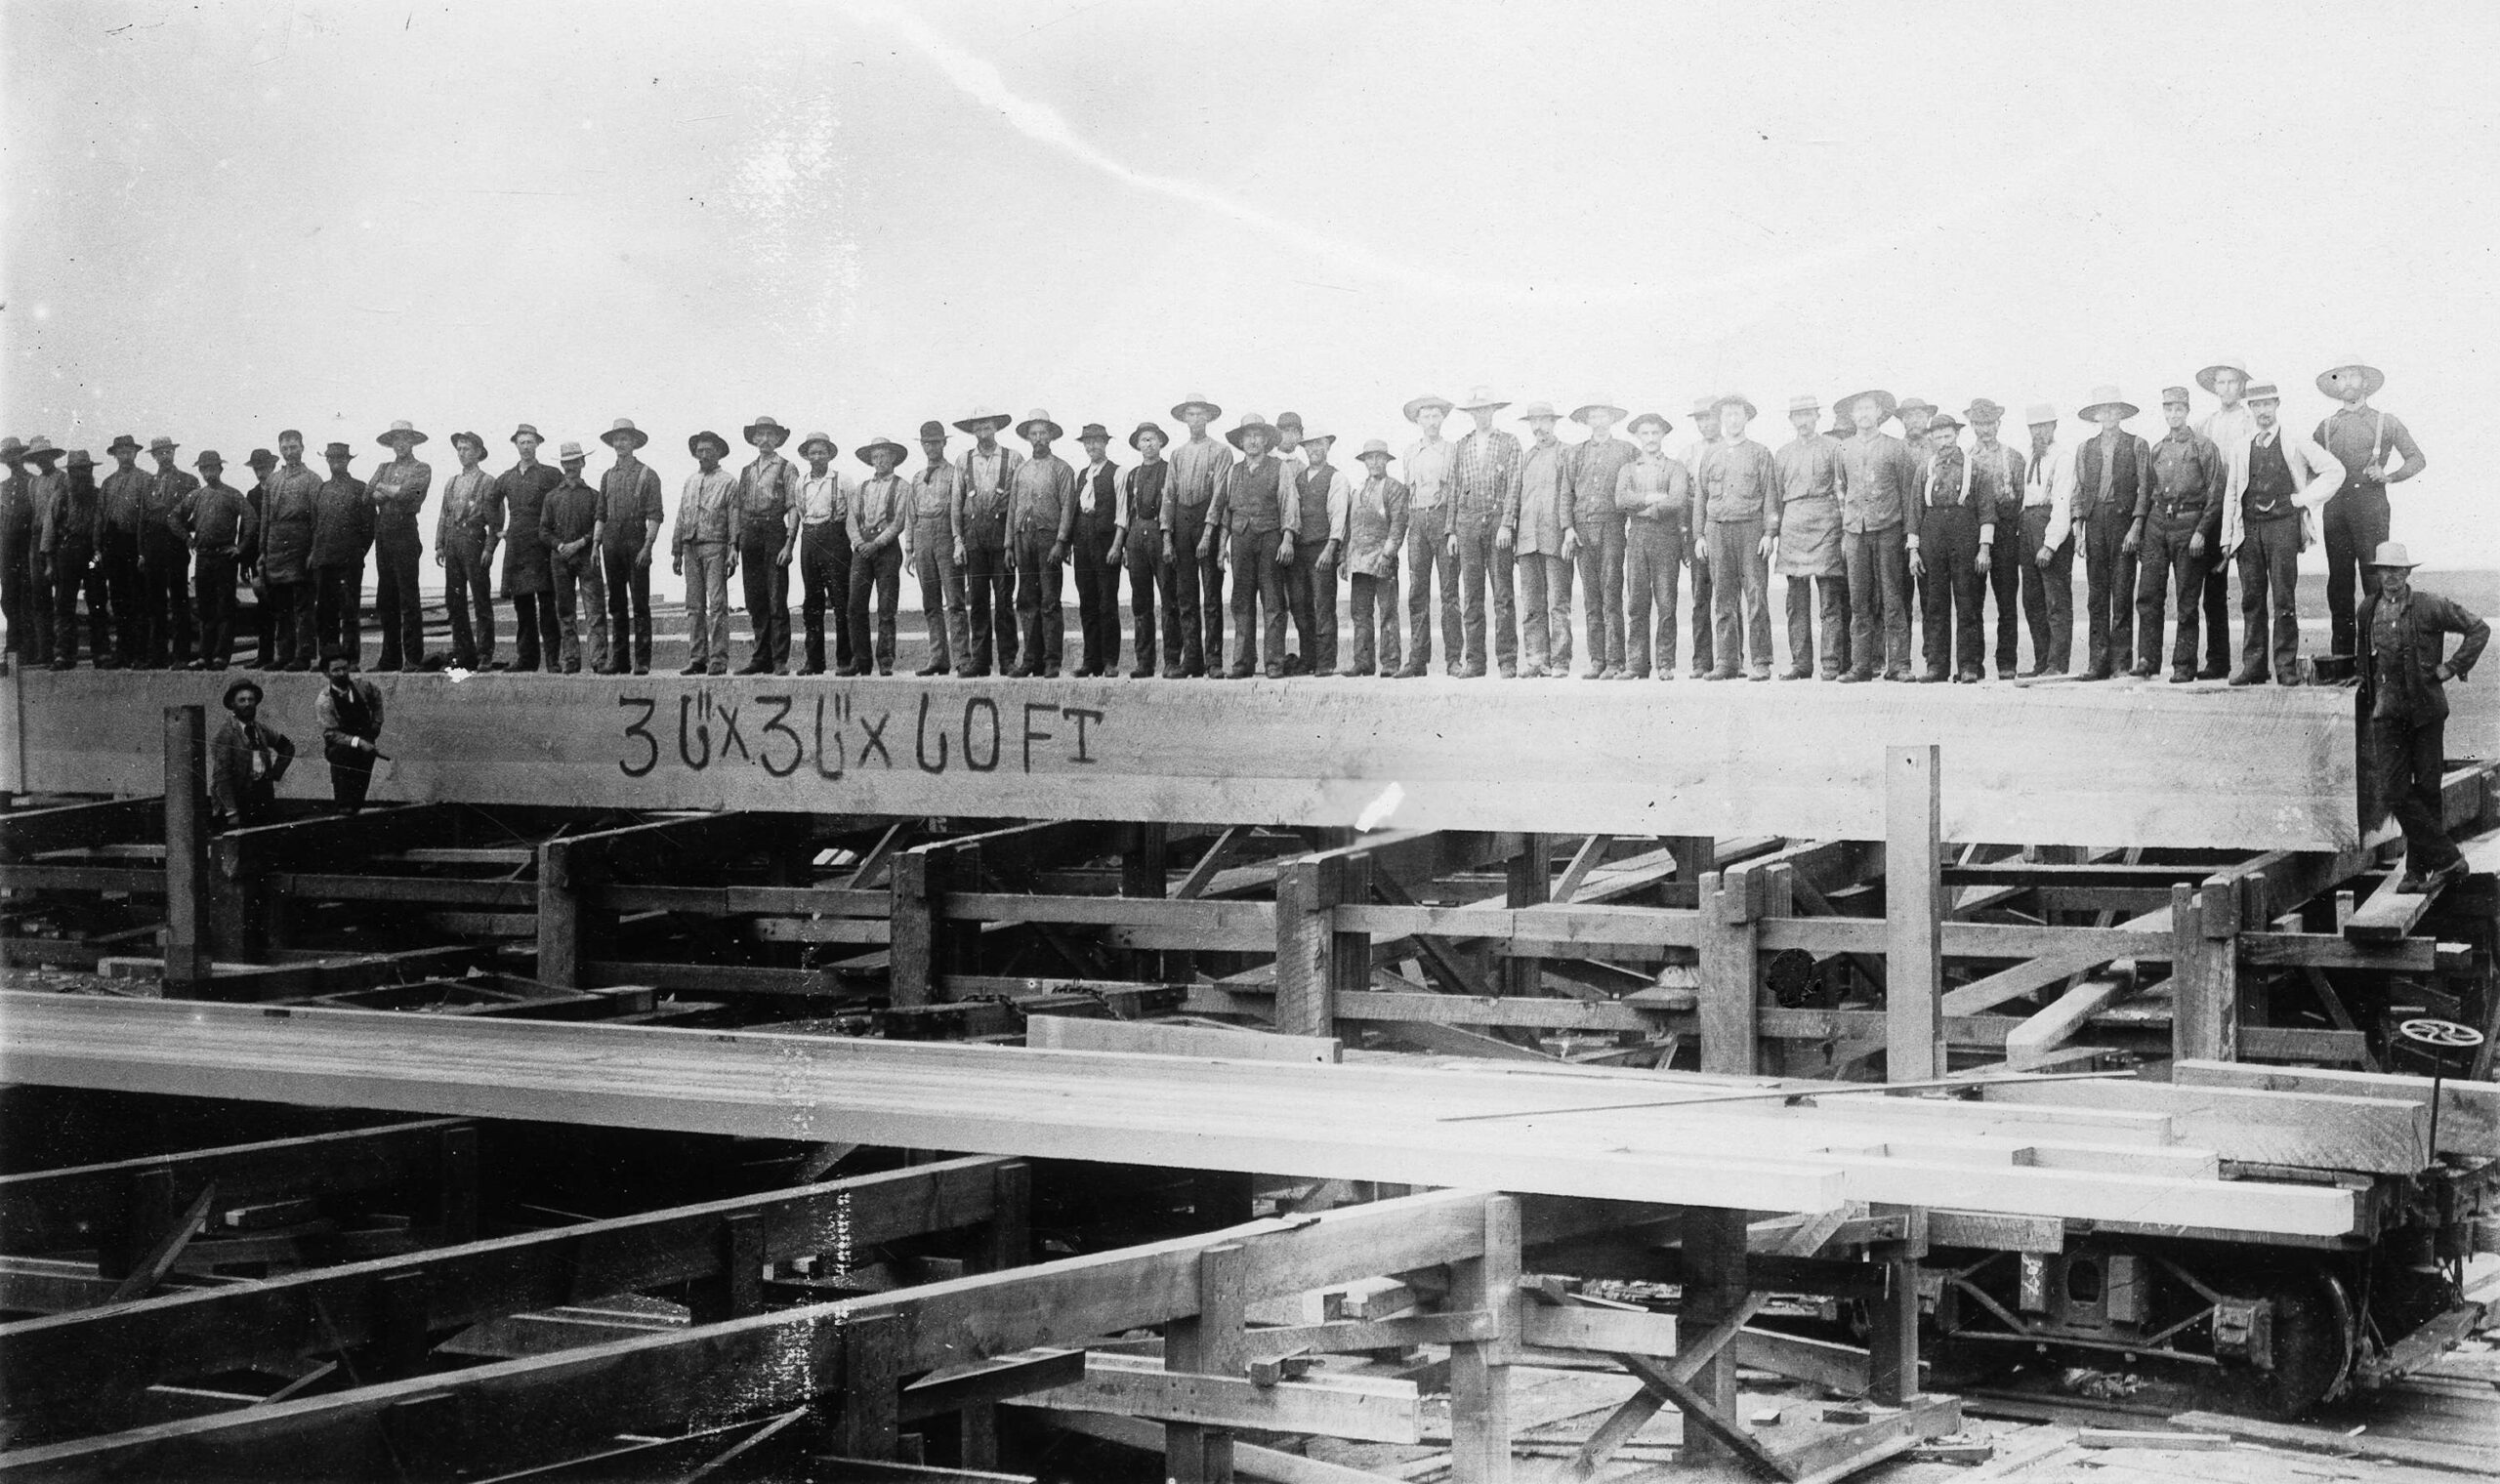 Hastings Sawmill workers lined up along a 60 foot long beam, 1900. Reference code: AM1036-S4-: CVA 703-4.7.5